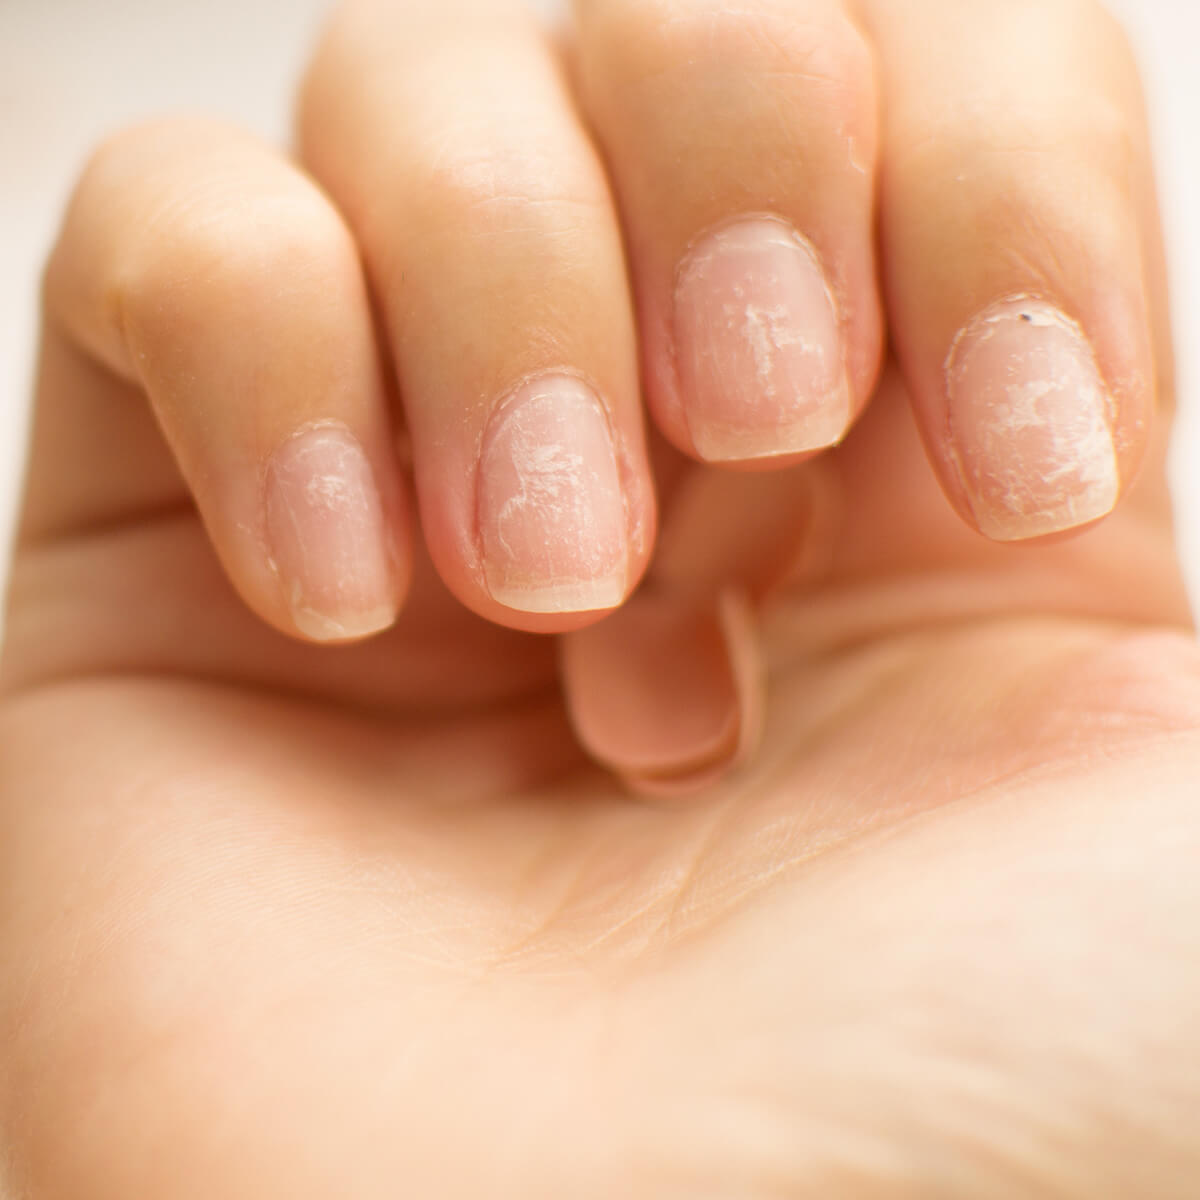 How to prevent brittle nails: 5 tips to follow | HealthShots